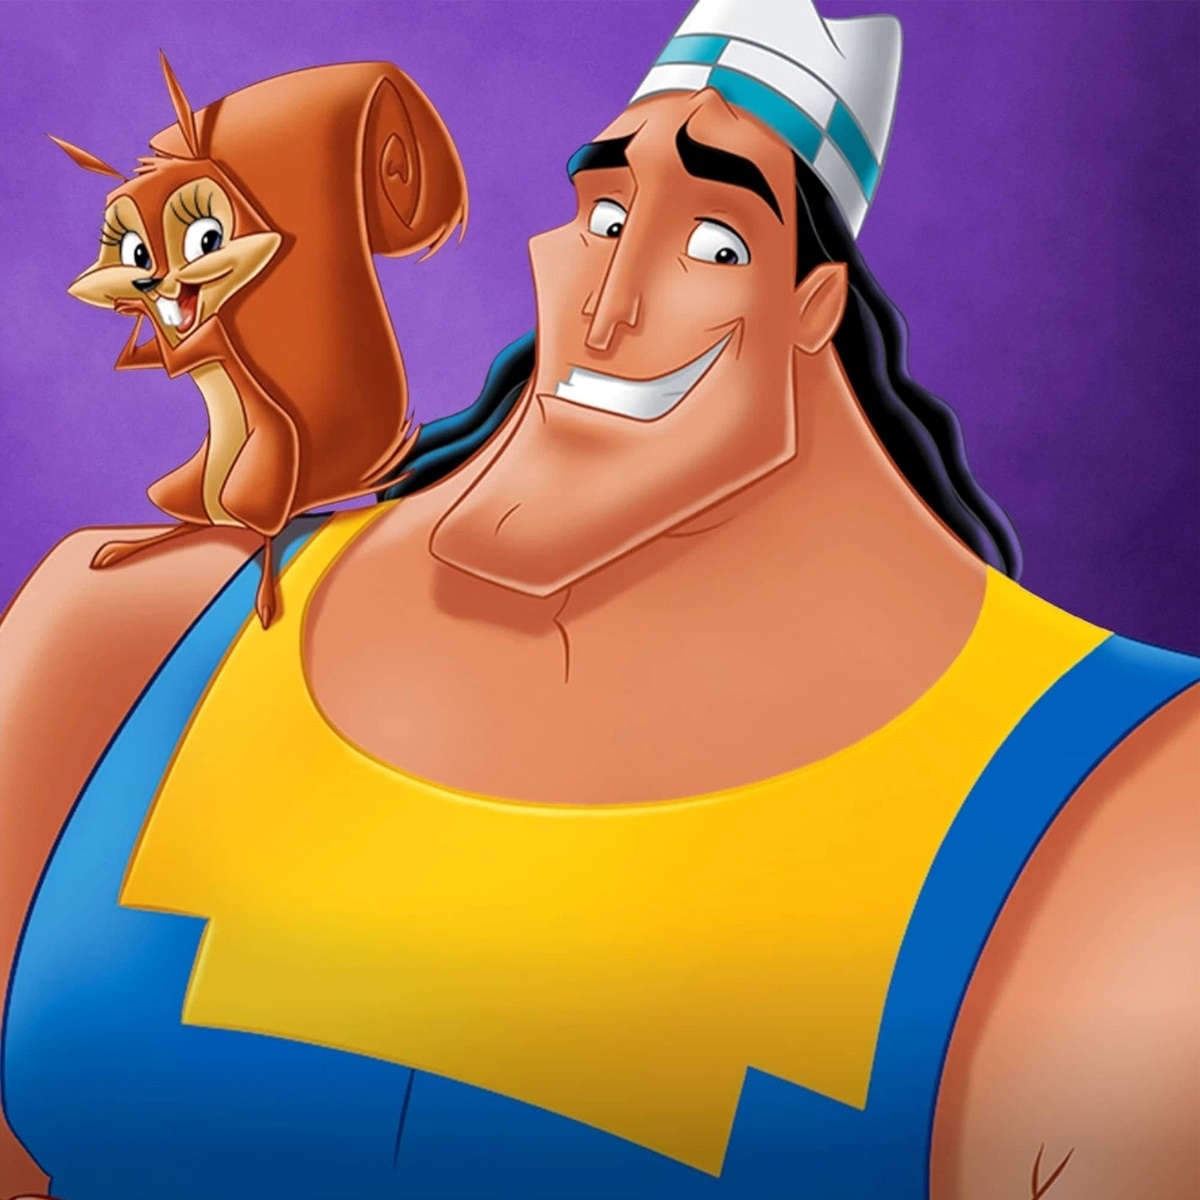 12-facts-about-kronk-the-emperors-new-groove